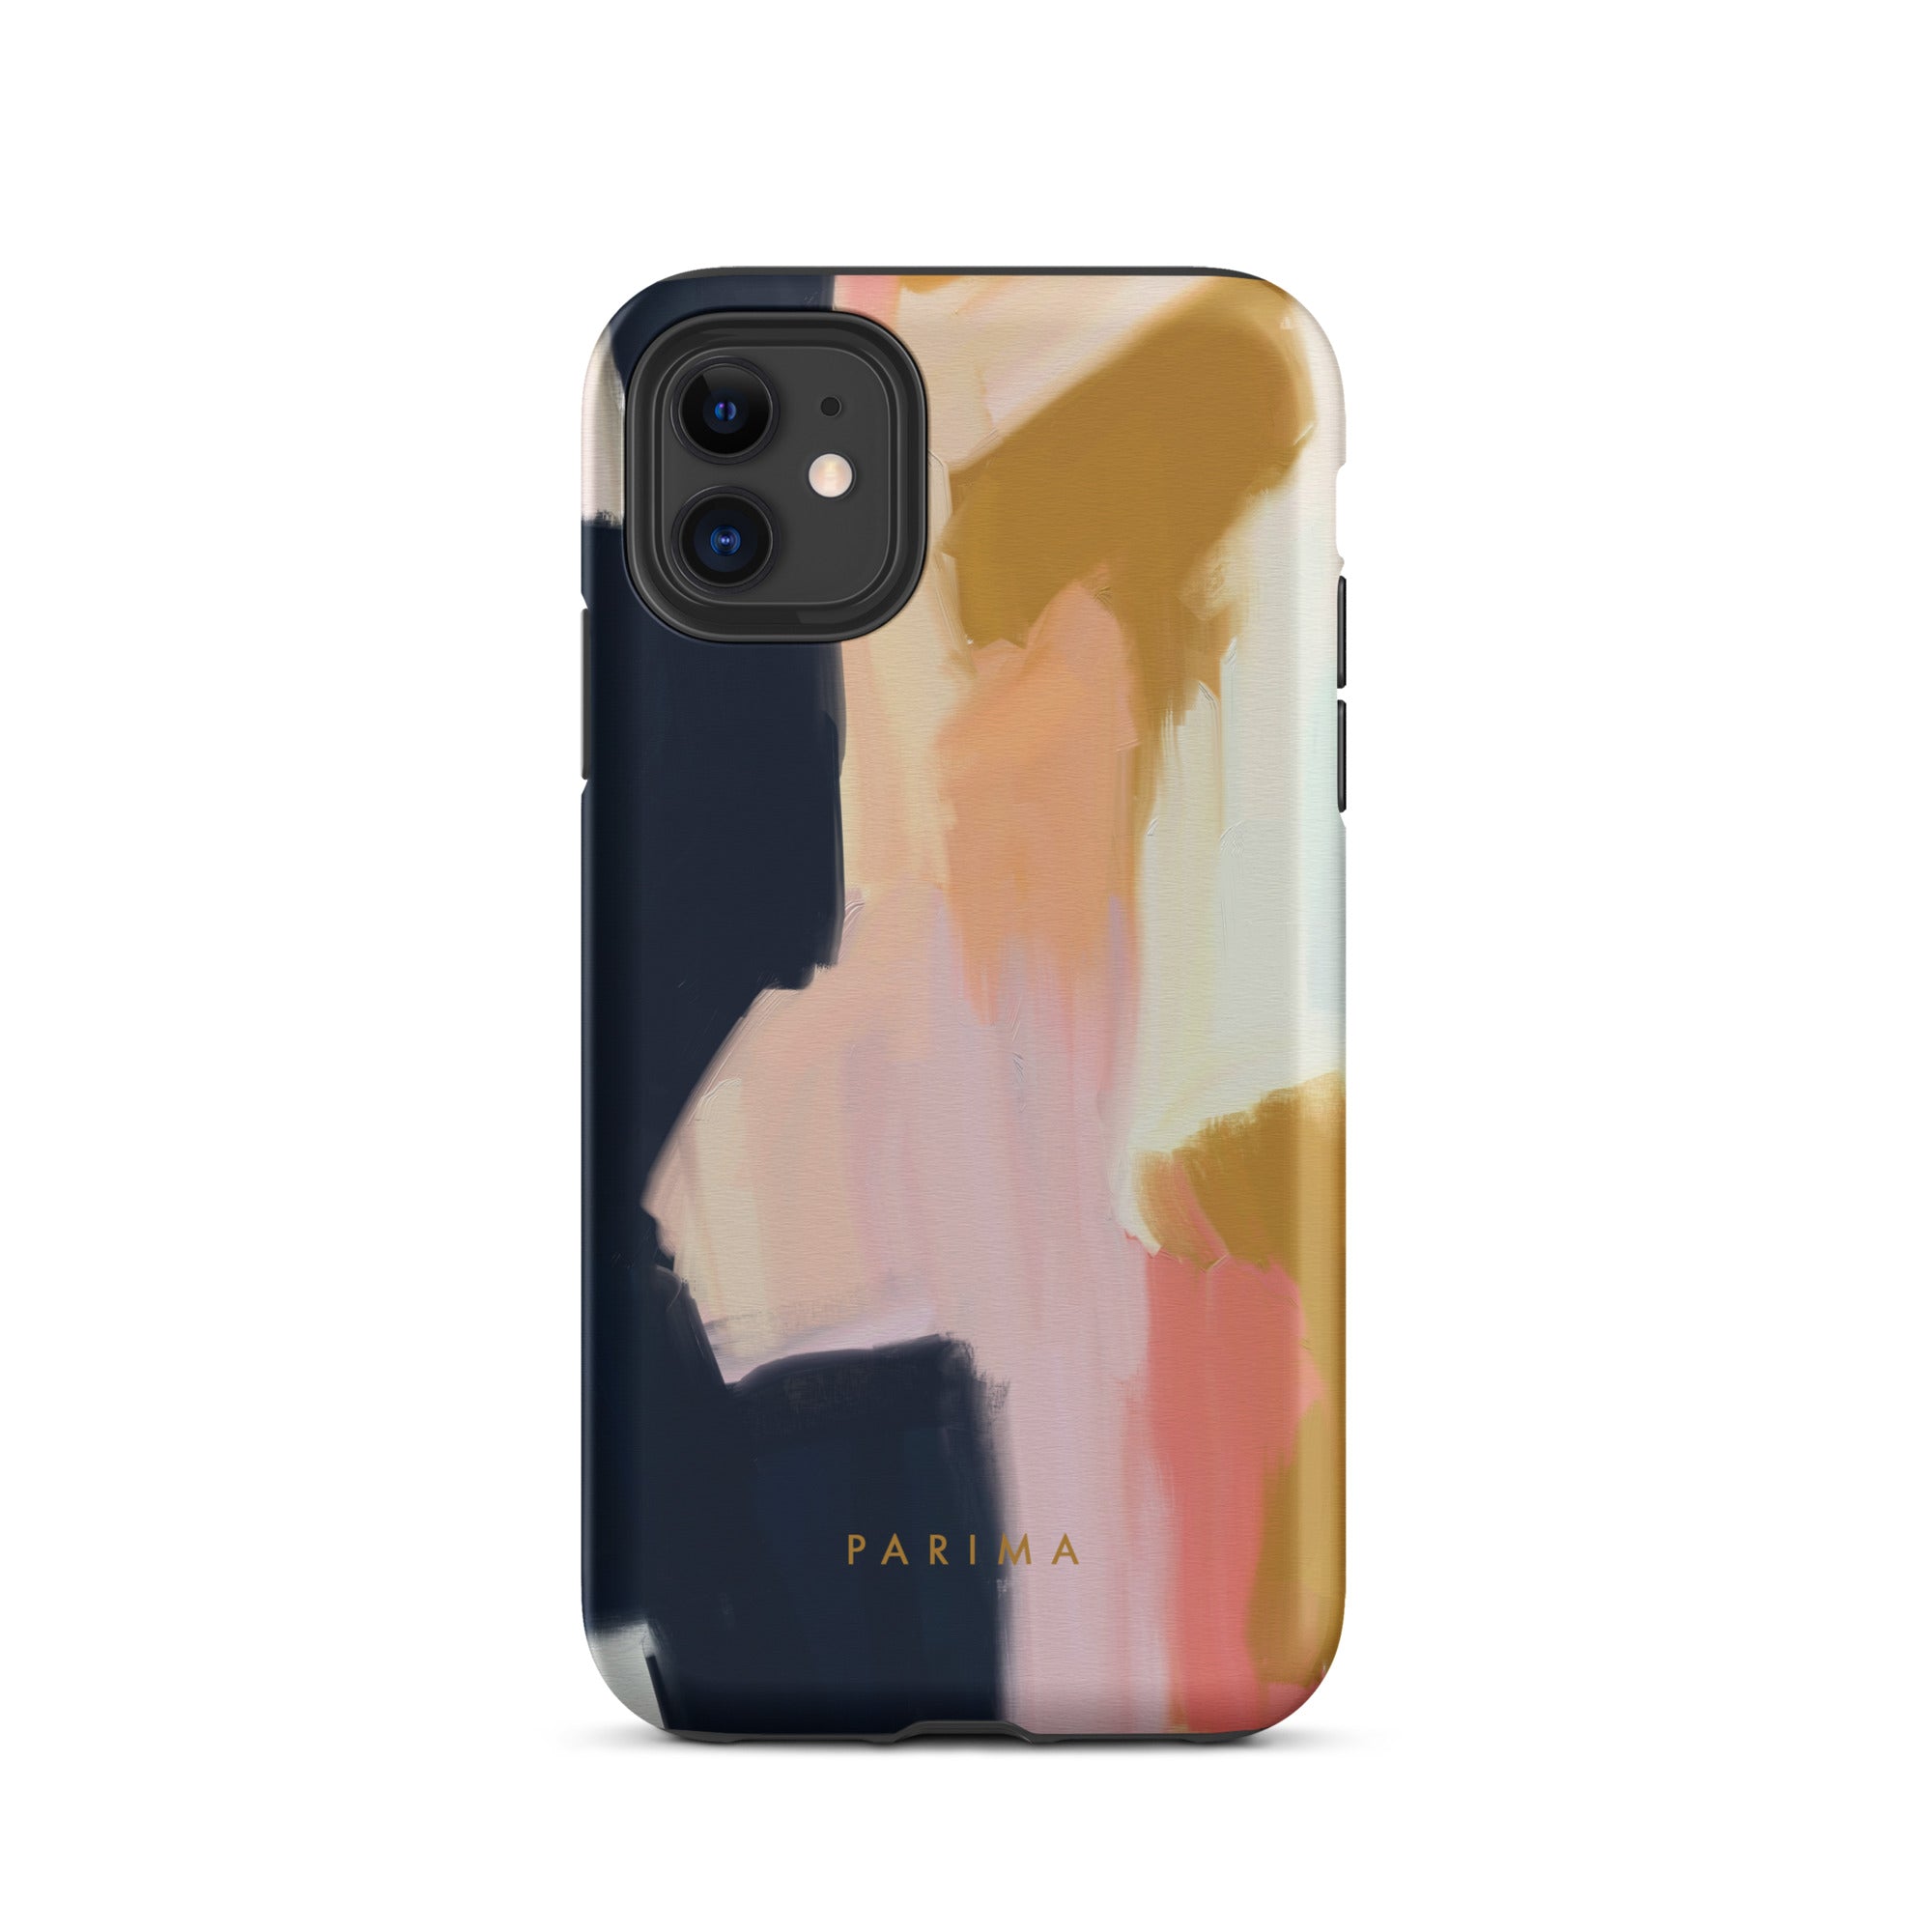 Kali, blue and gold abstract art - iPhone 11 tough case by Parima Studio